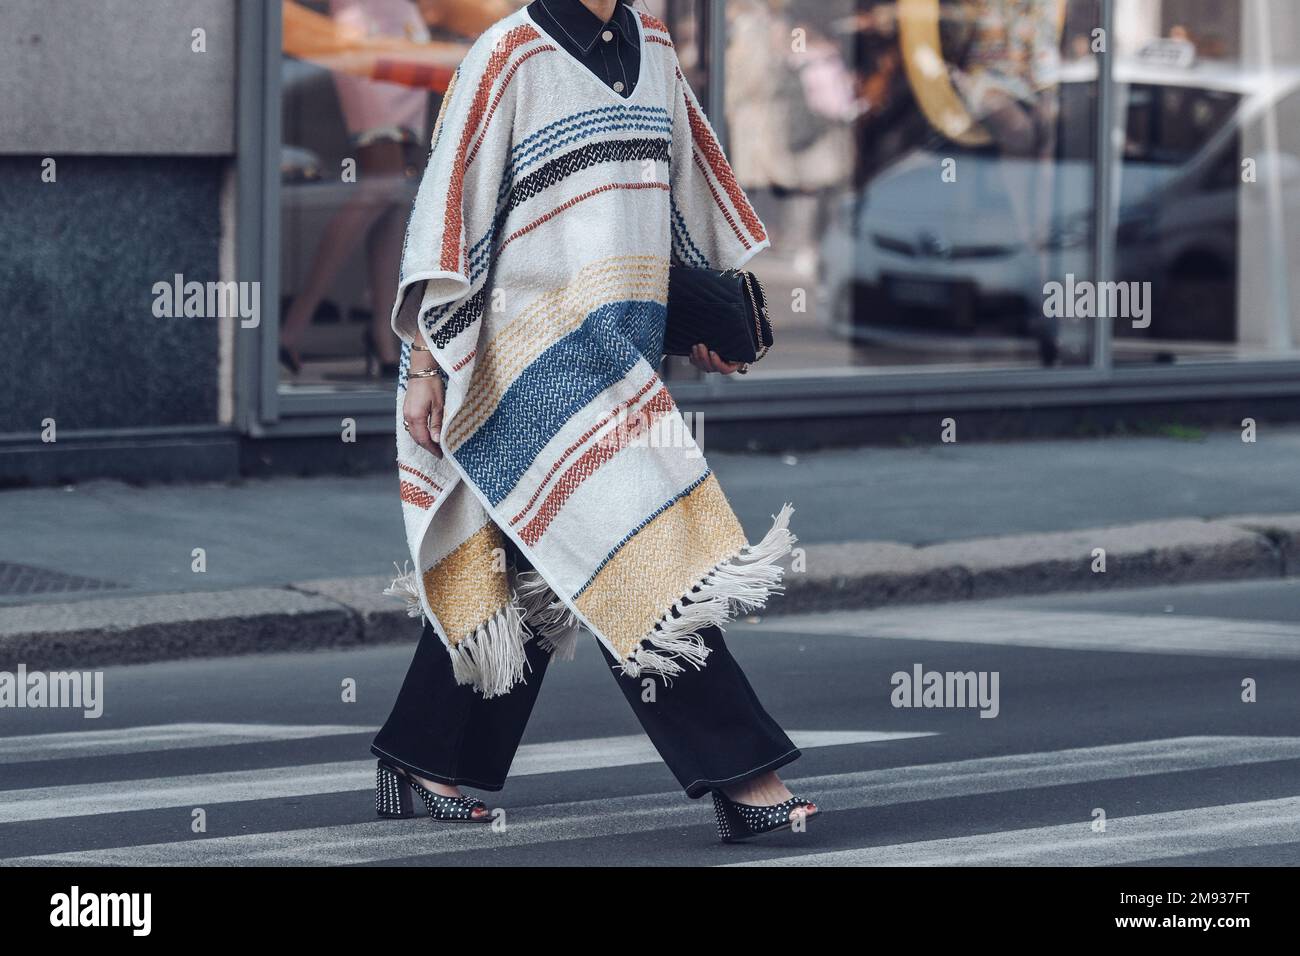 Milan, Italy - February 26, 2022: Woman in stylish poncho walking on the street in daytime. Stock Photo